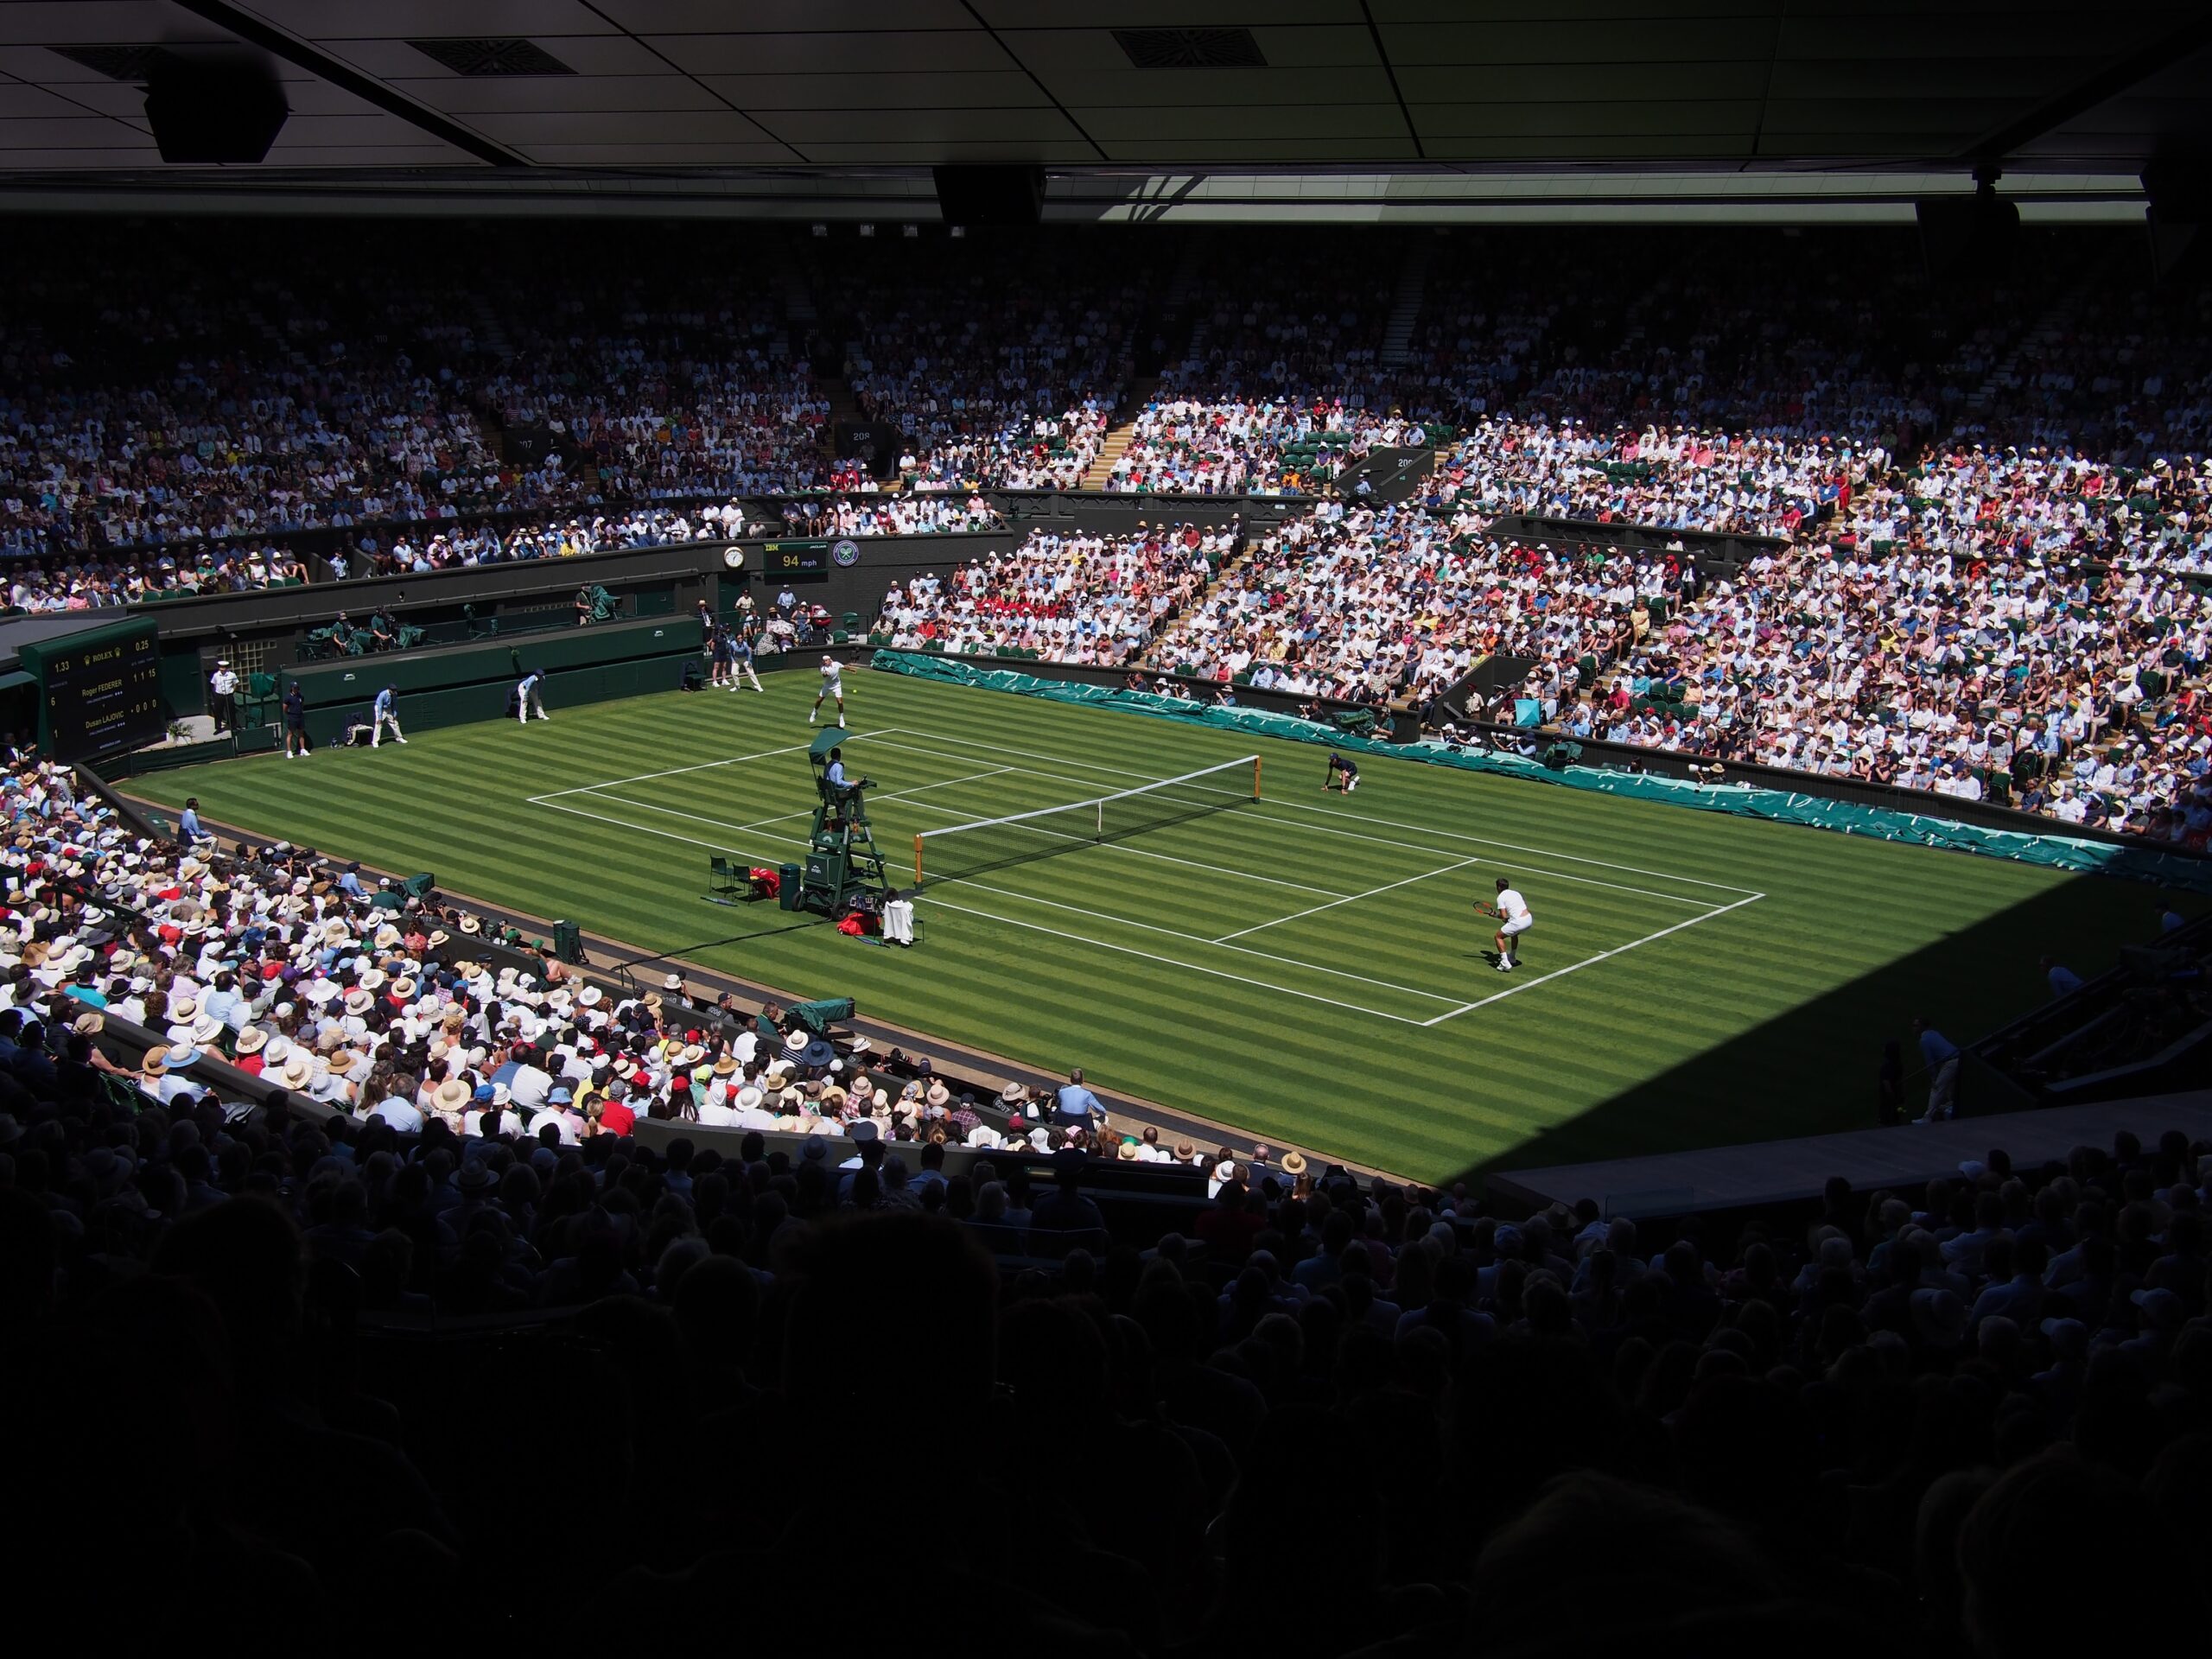 Two tennis players on centre court at Wimbledon